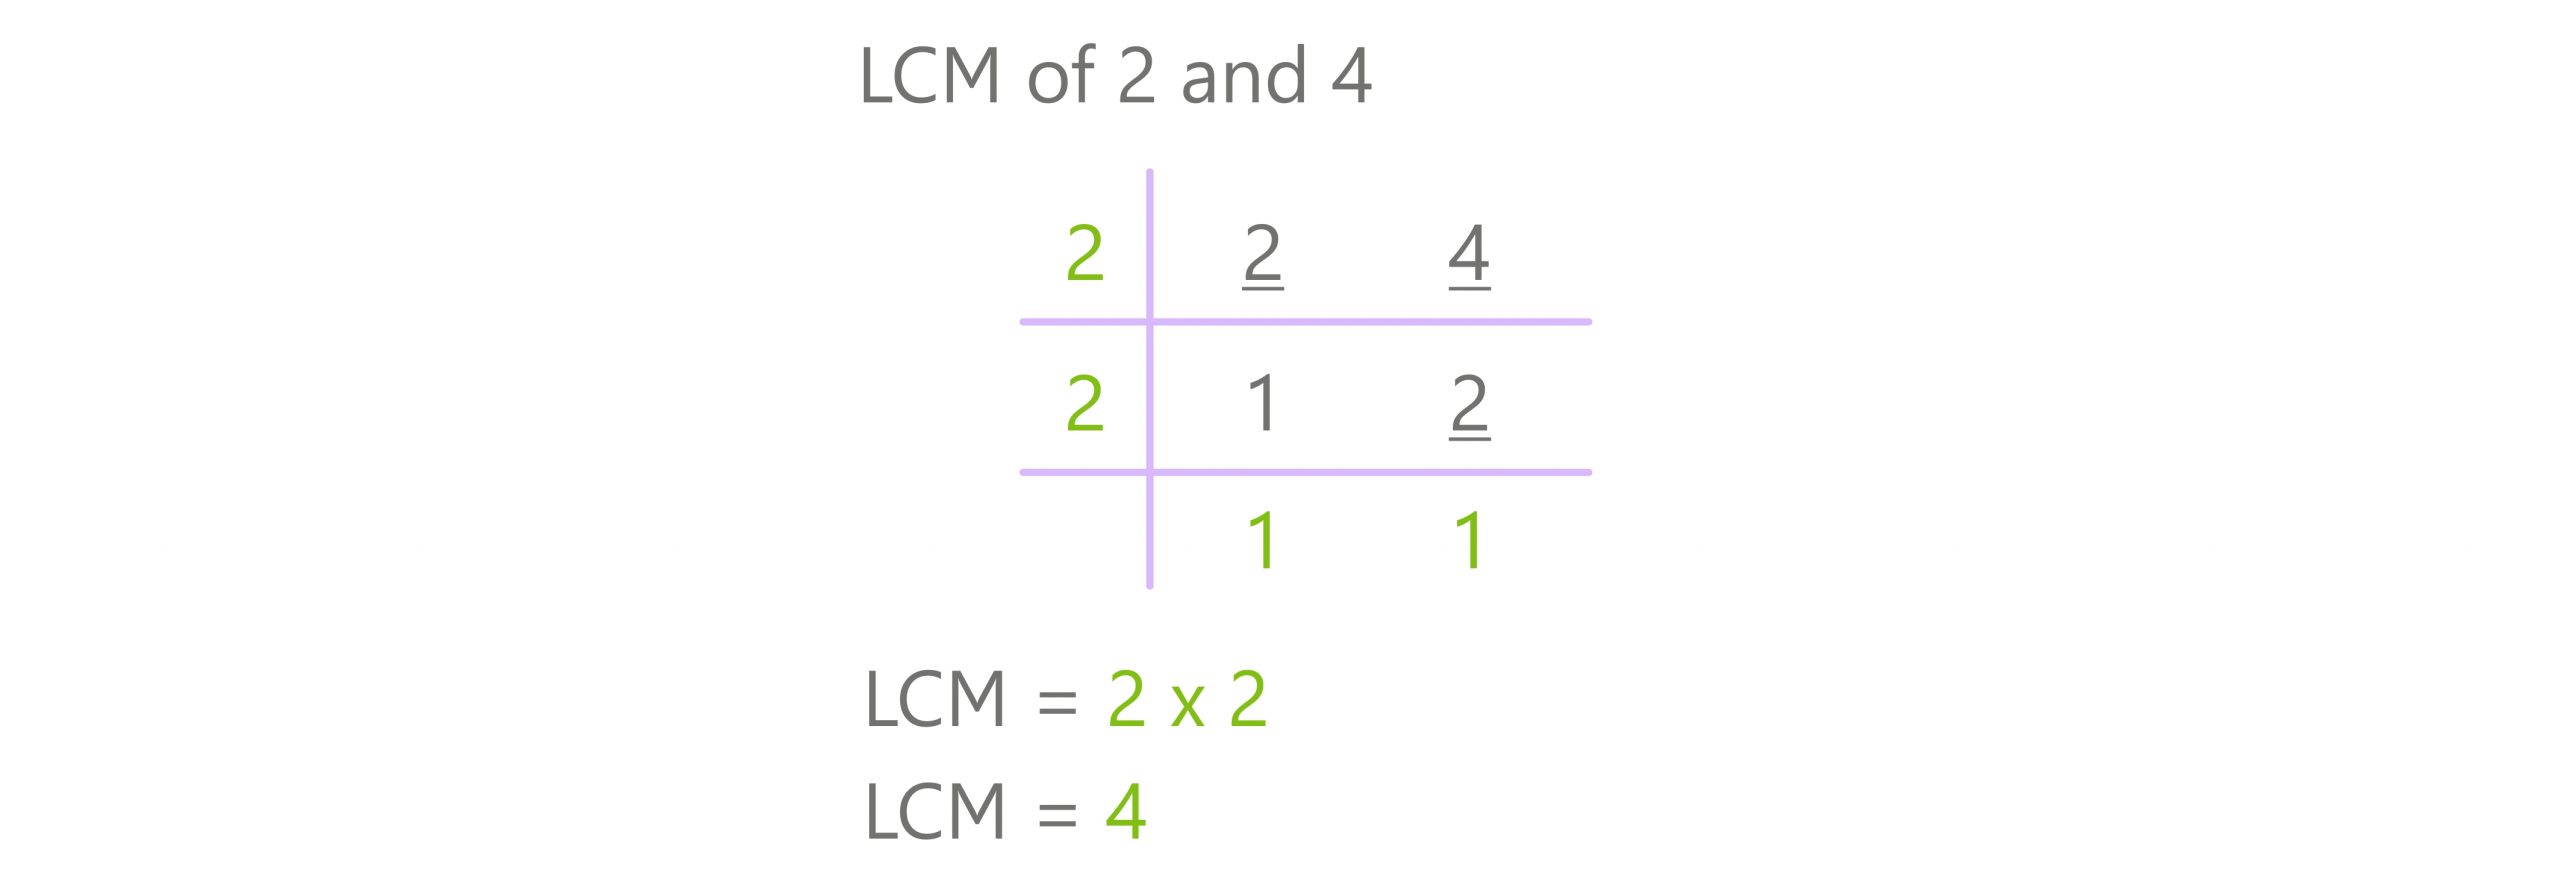 division method lcm 2 and 4